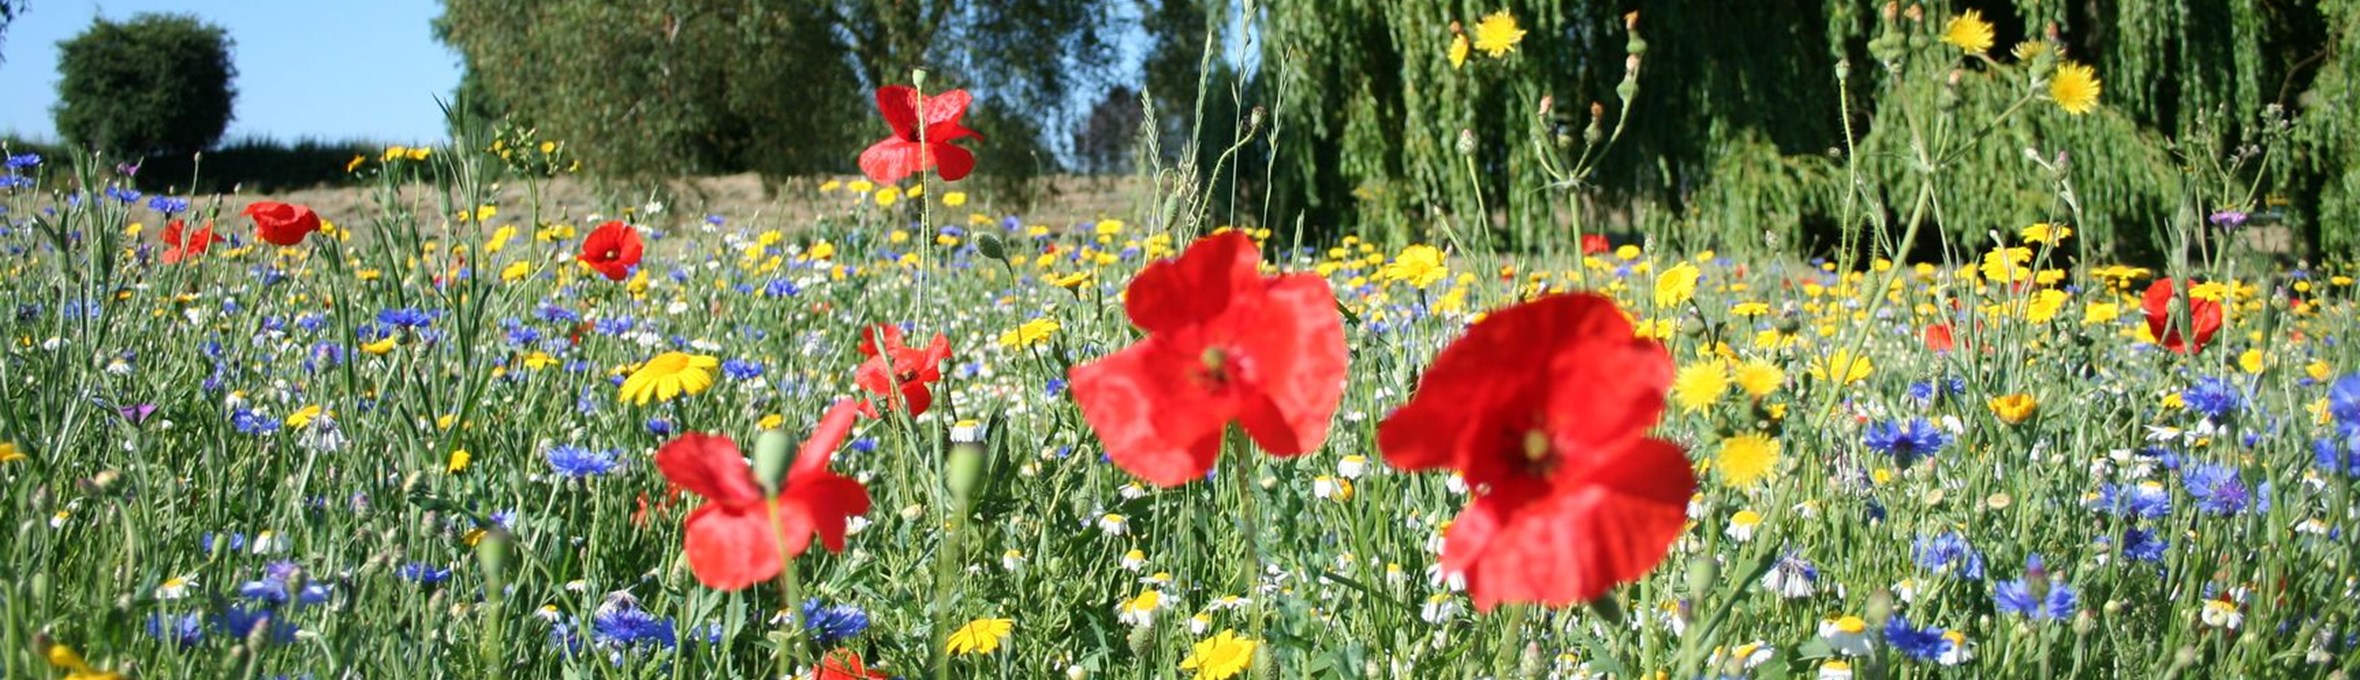 Wildflowers and poppies with willow tree and blue skies behind